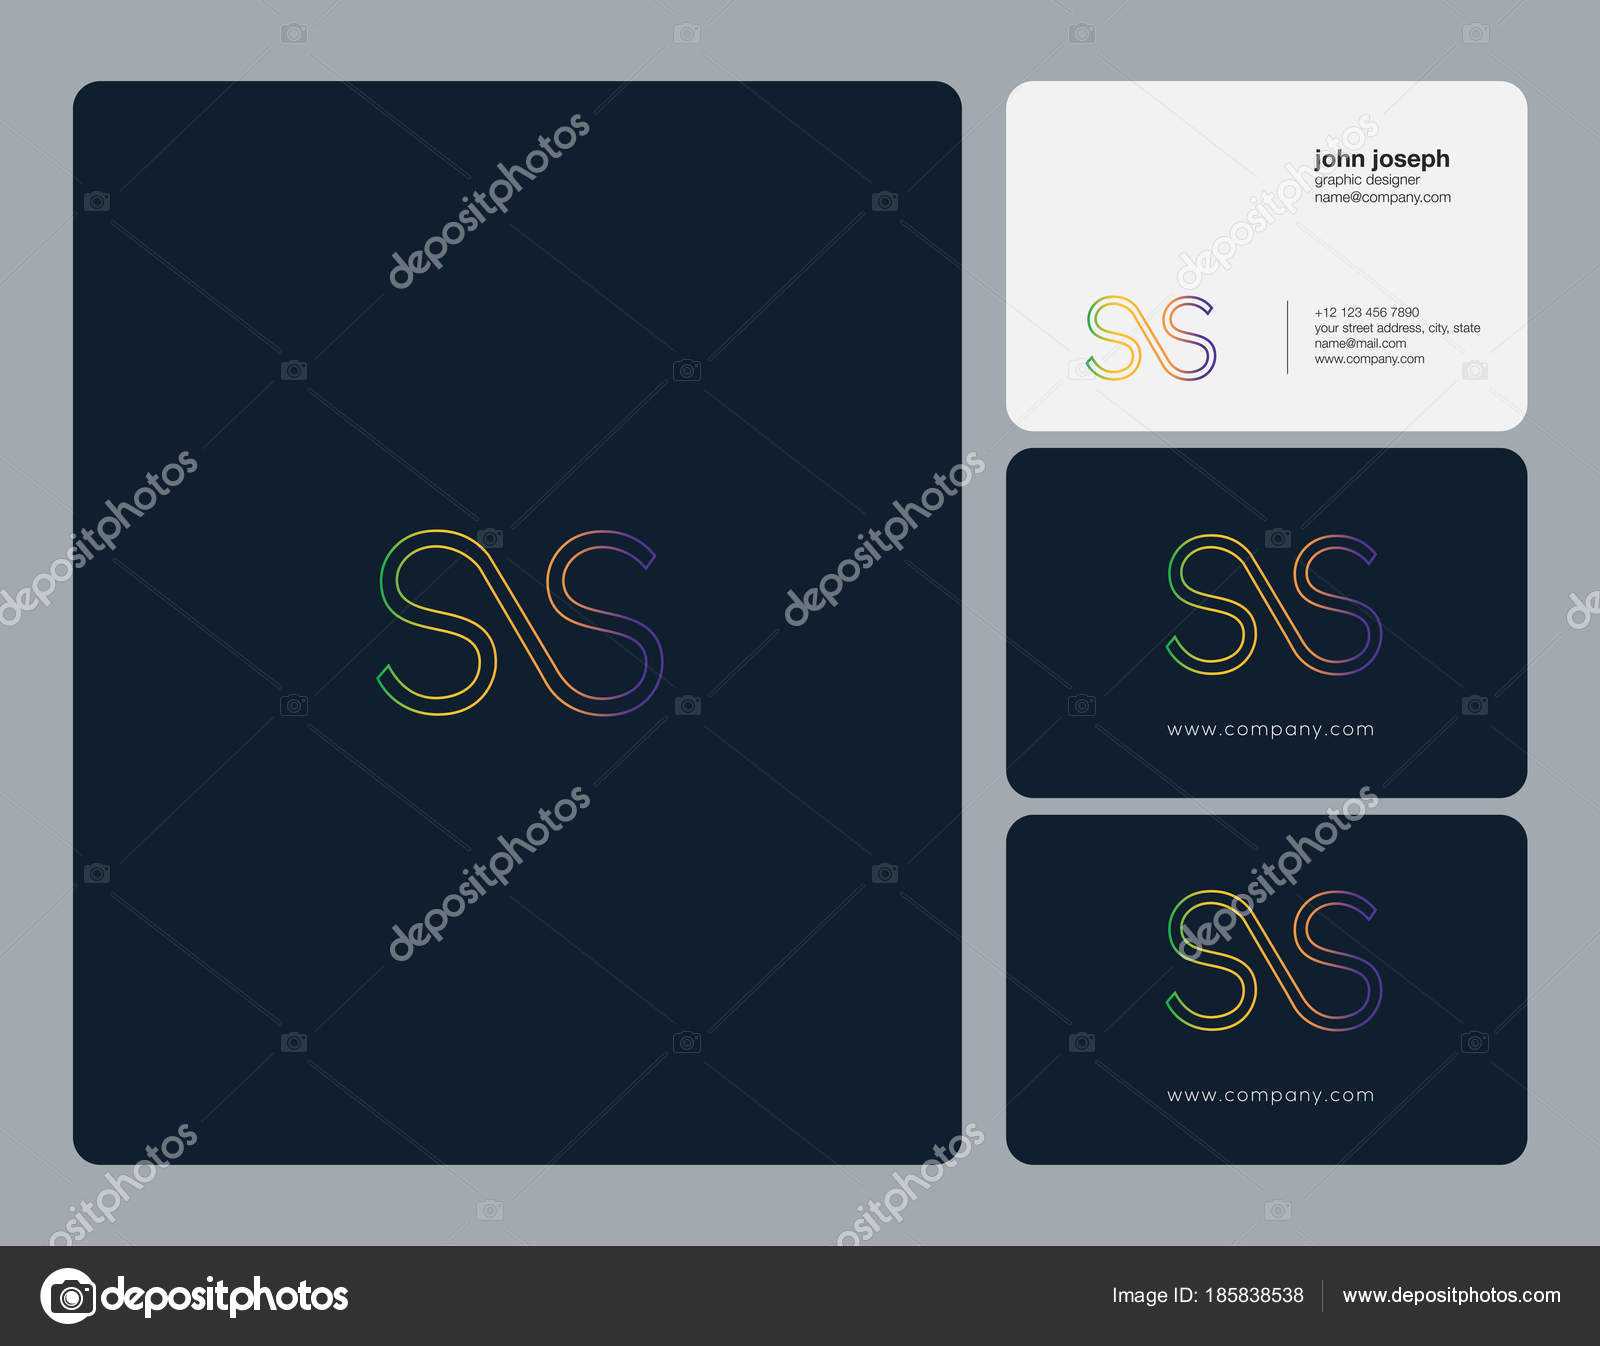 Ss Card Template | Joint Letters Logo Business Card Template In Ss Card Template